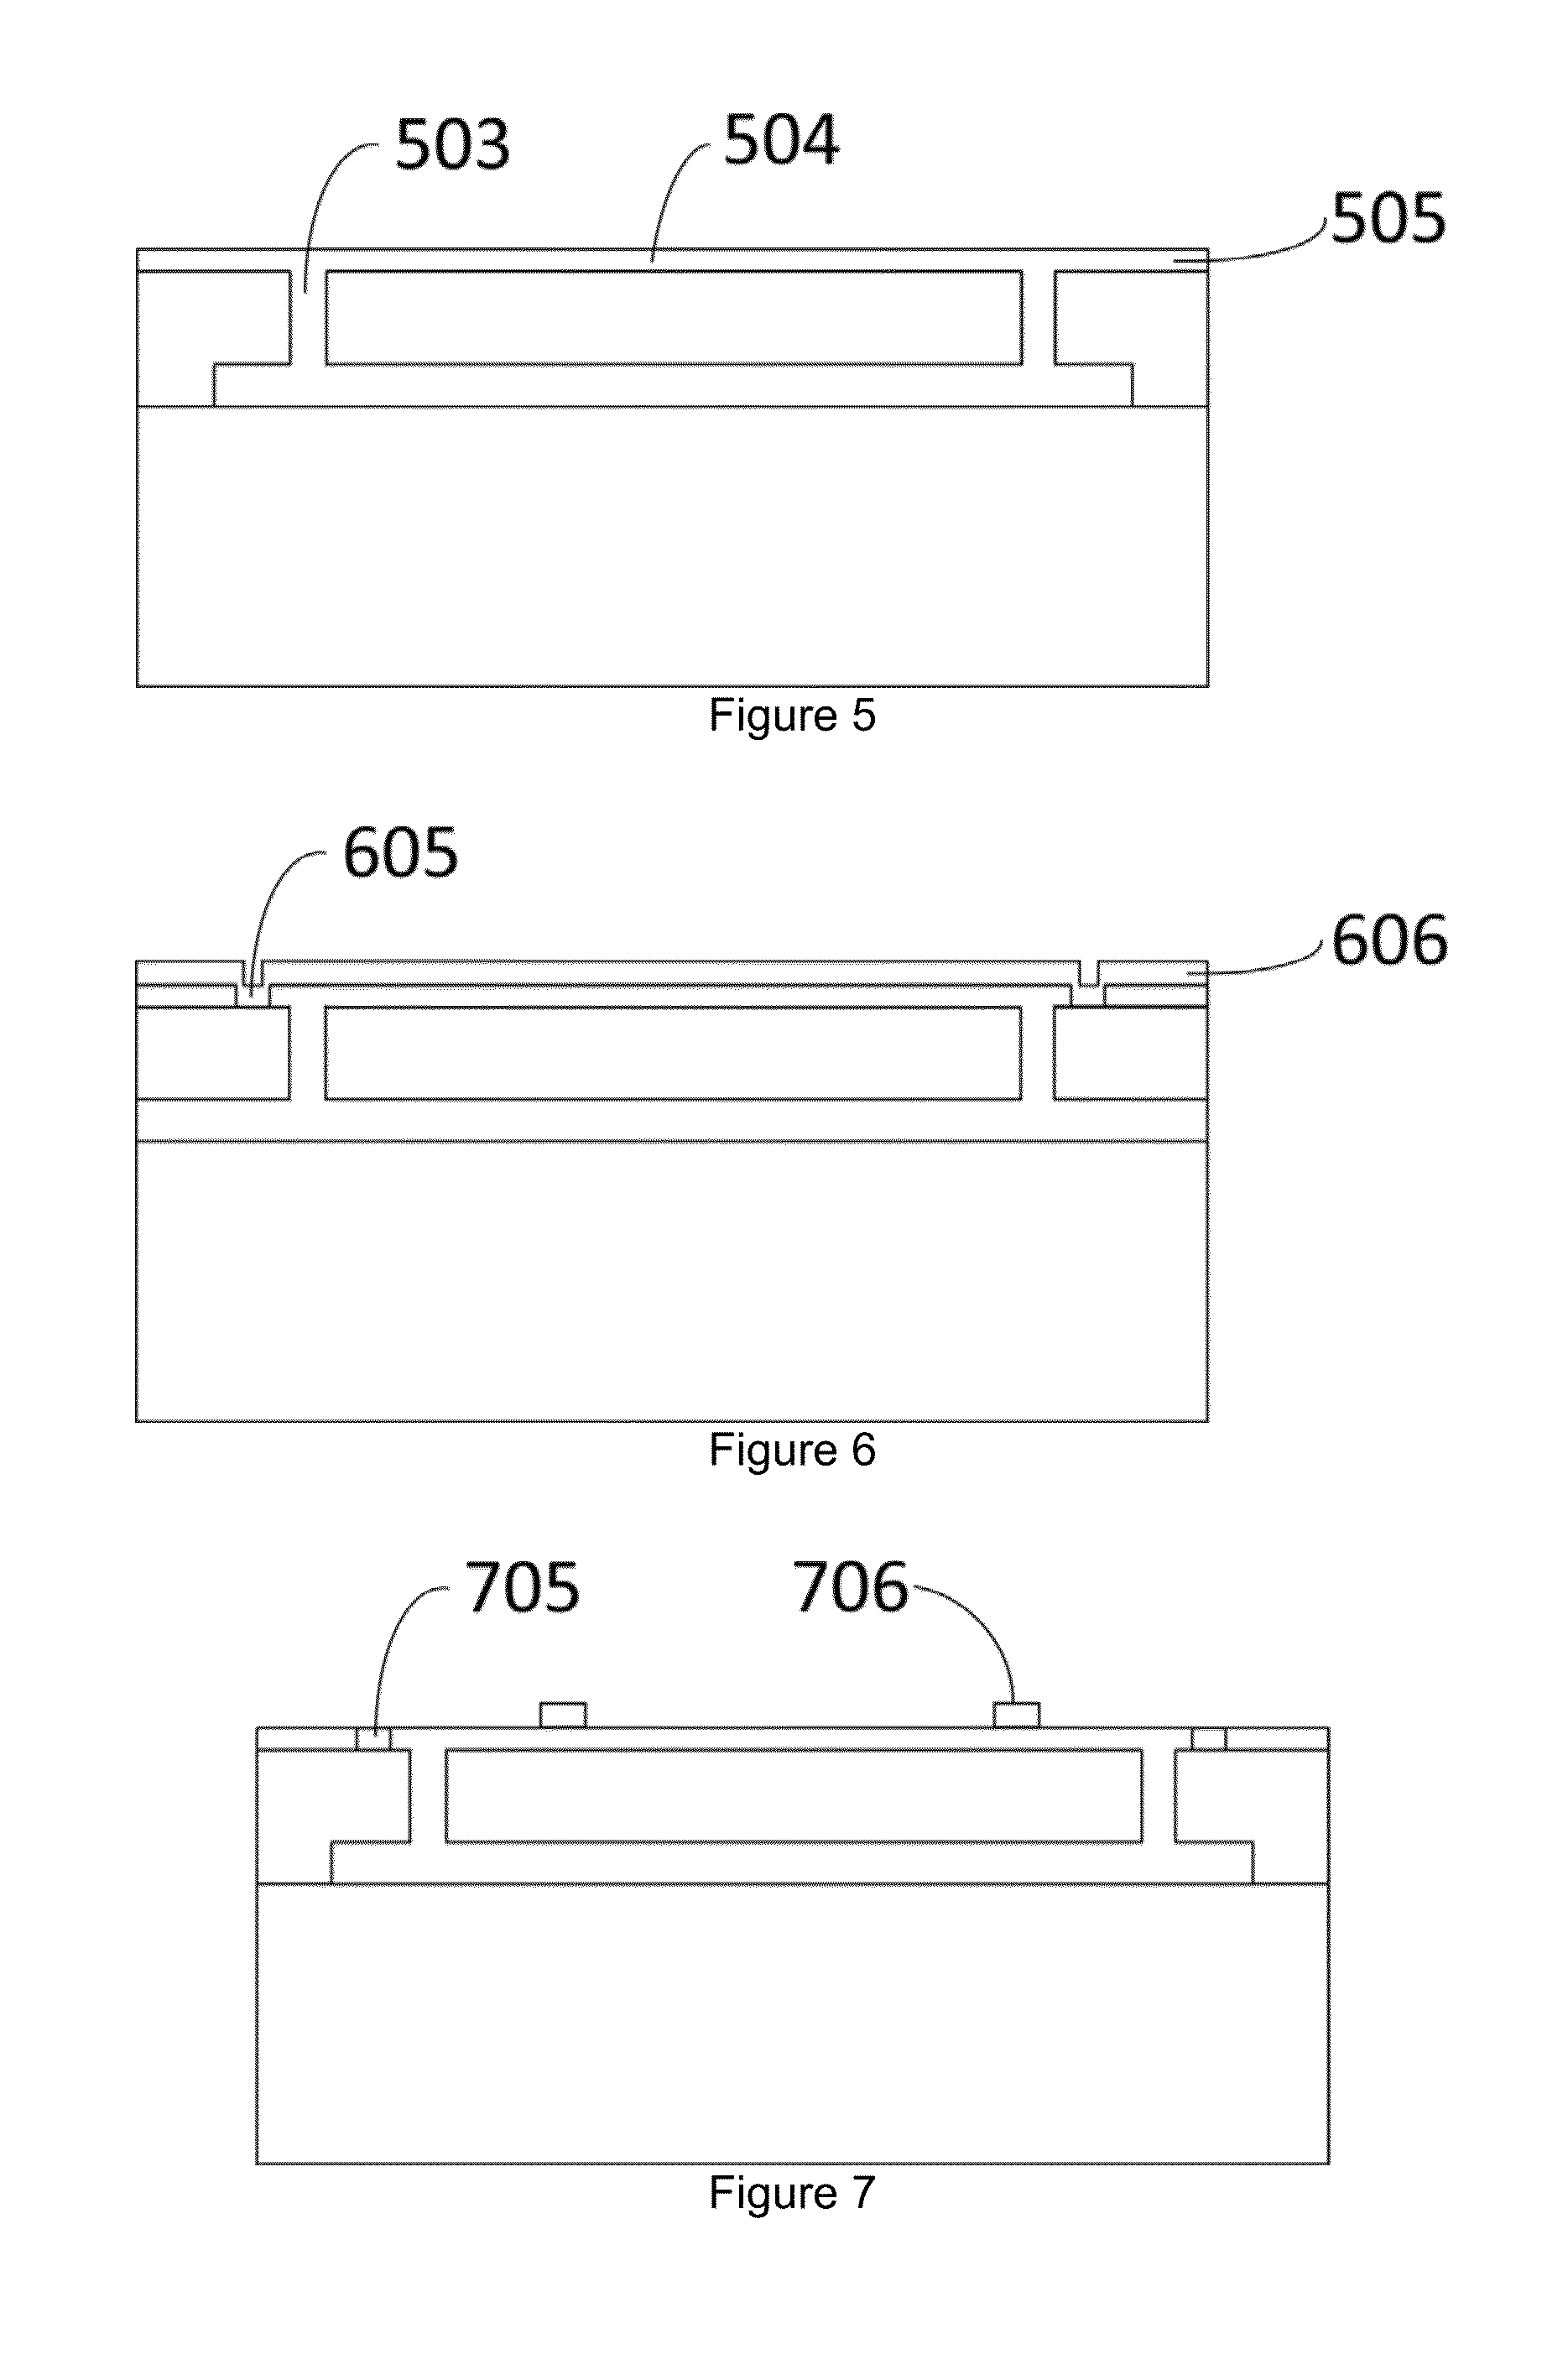 Structure and fabrication method of a high performance MEMS thermopile ir detector